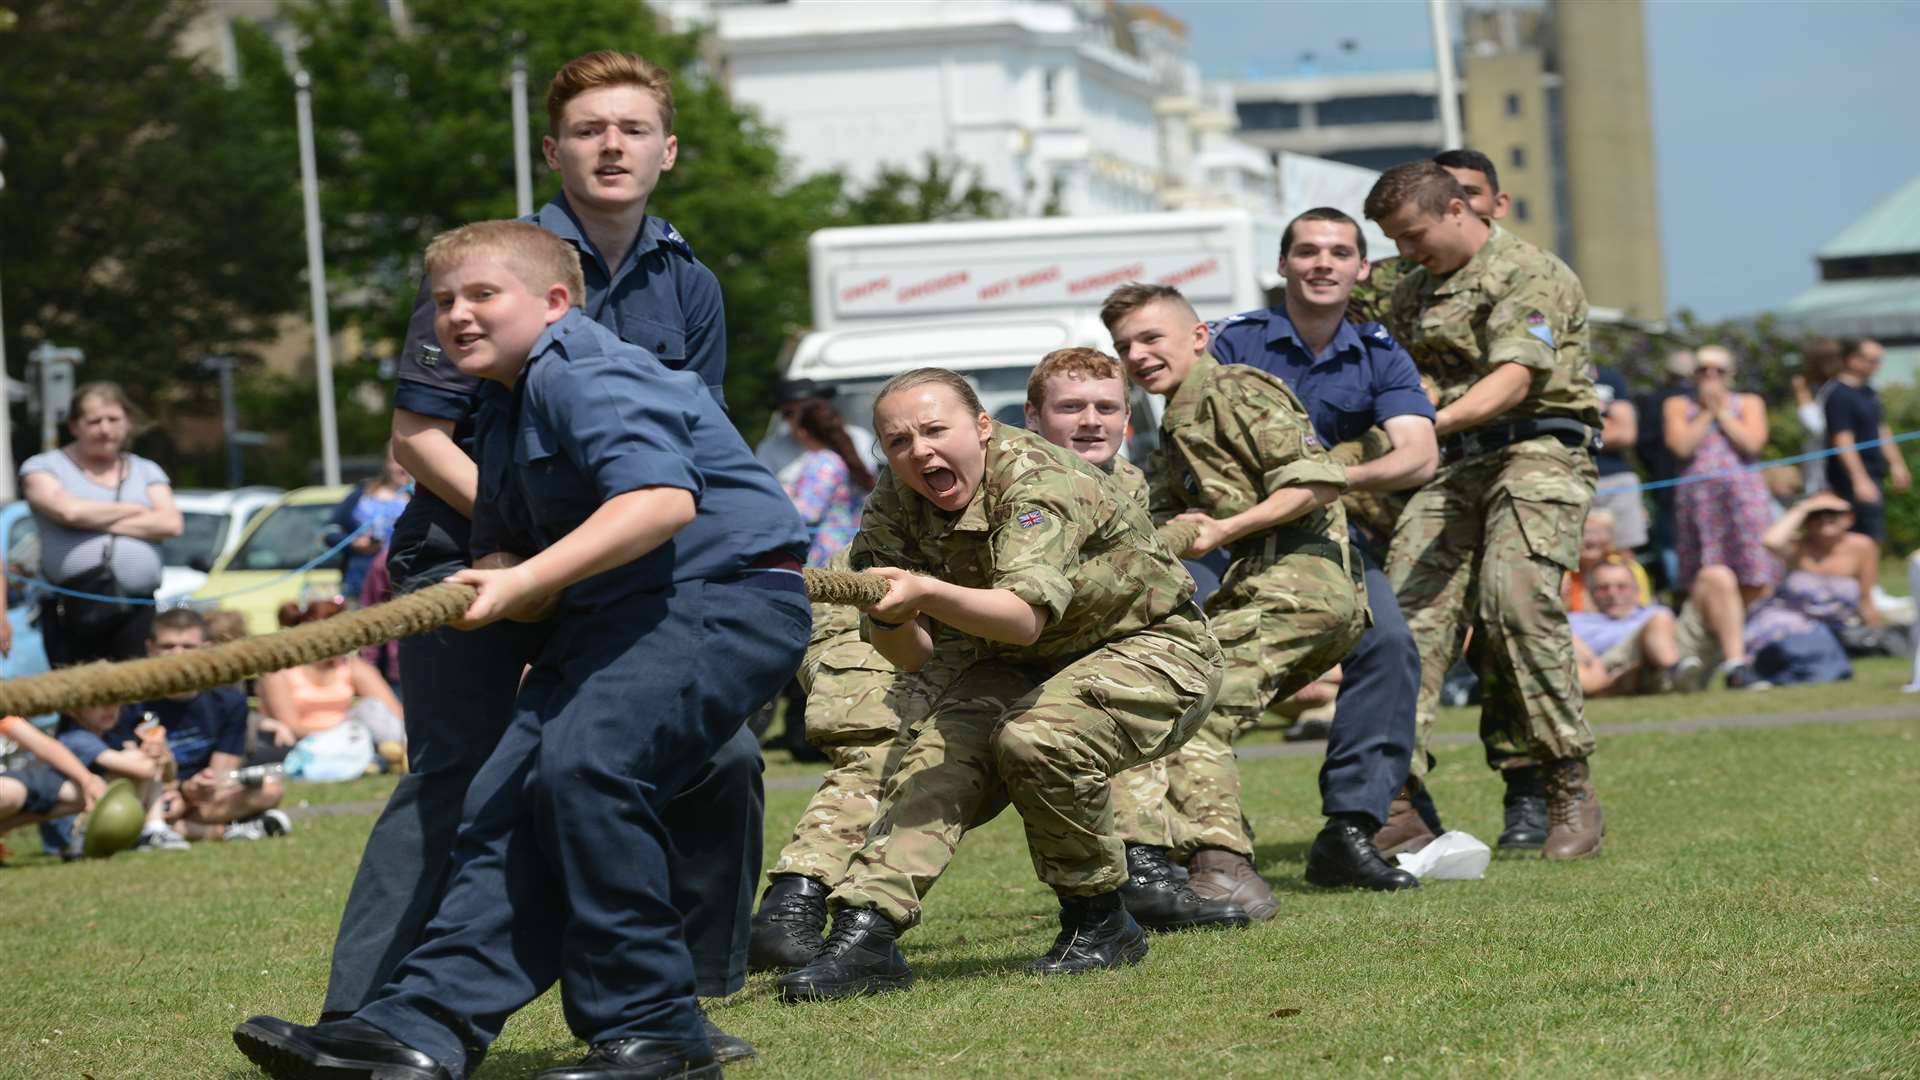 Cadets take part in a tug of war competition in Folkestone